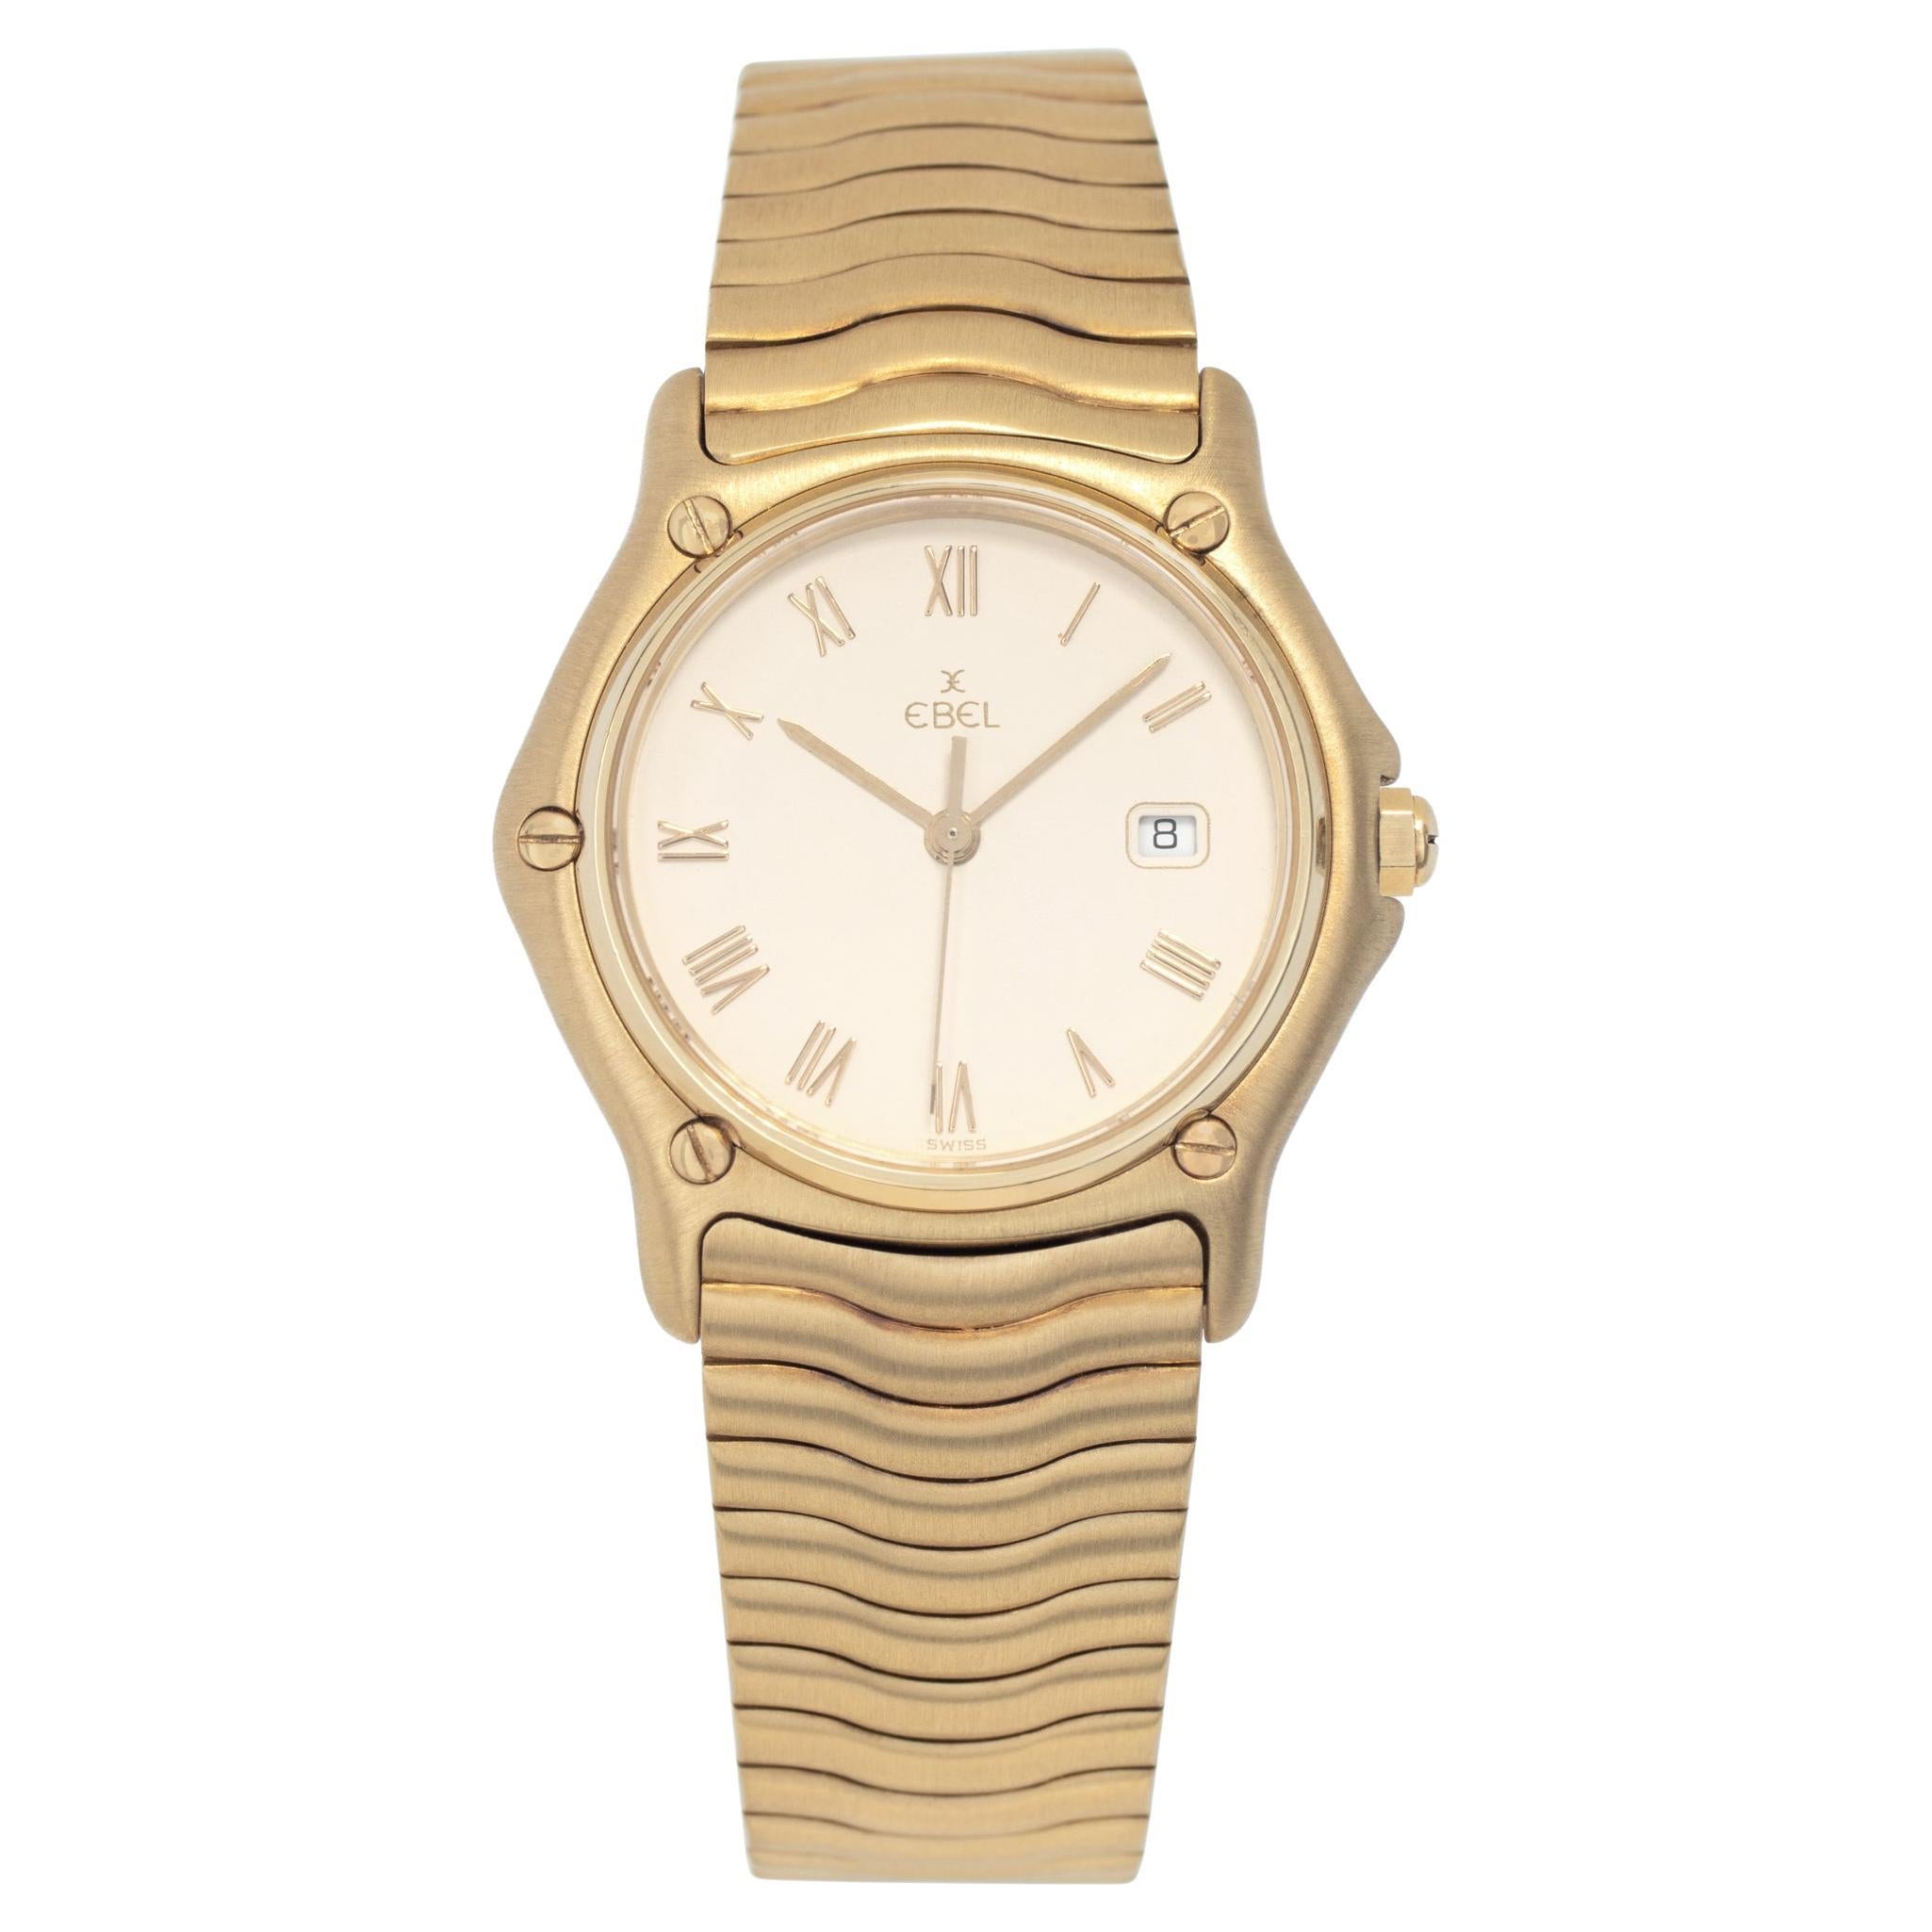 Ebel Sportwave 883909 in yellow gold with a  Cream dial 31mm Quartz watch